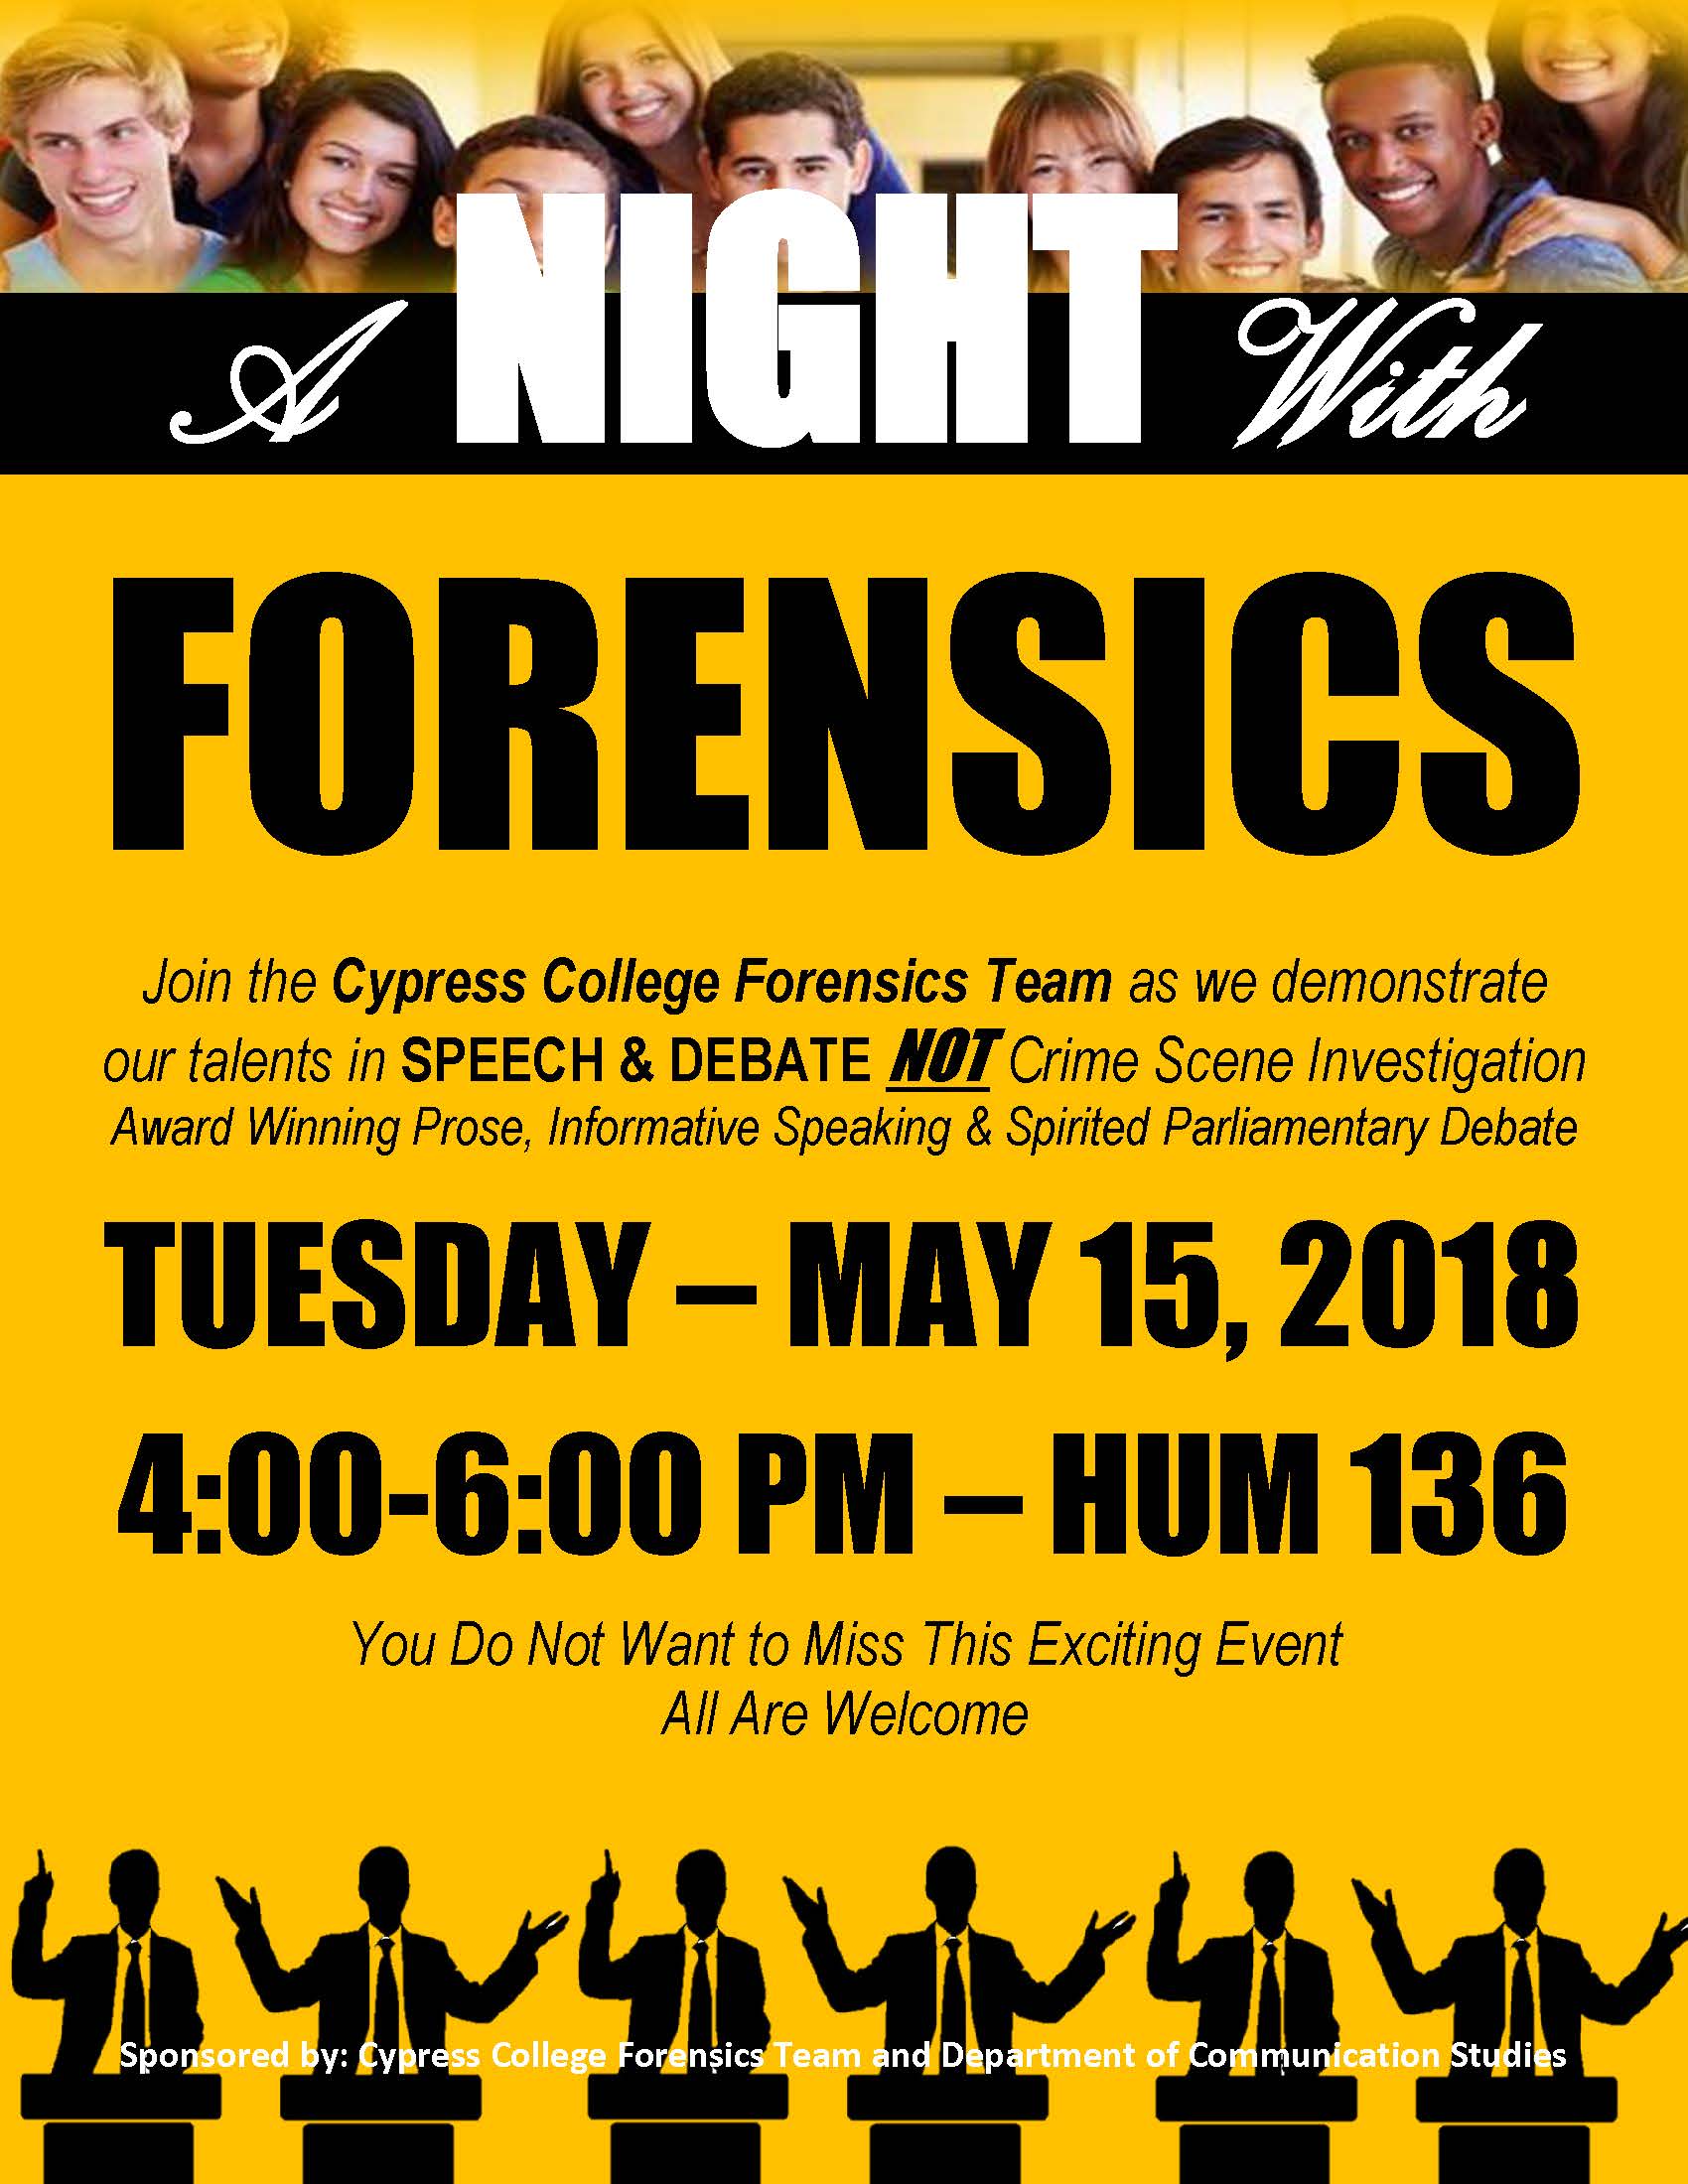 A Night with Forensics flyer